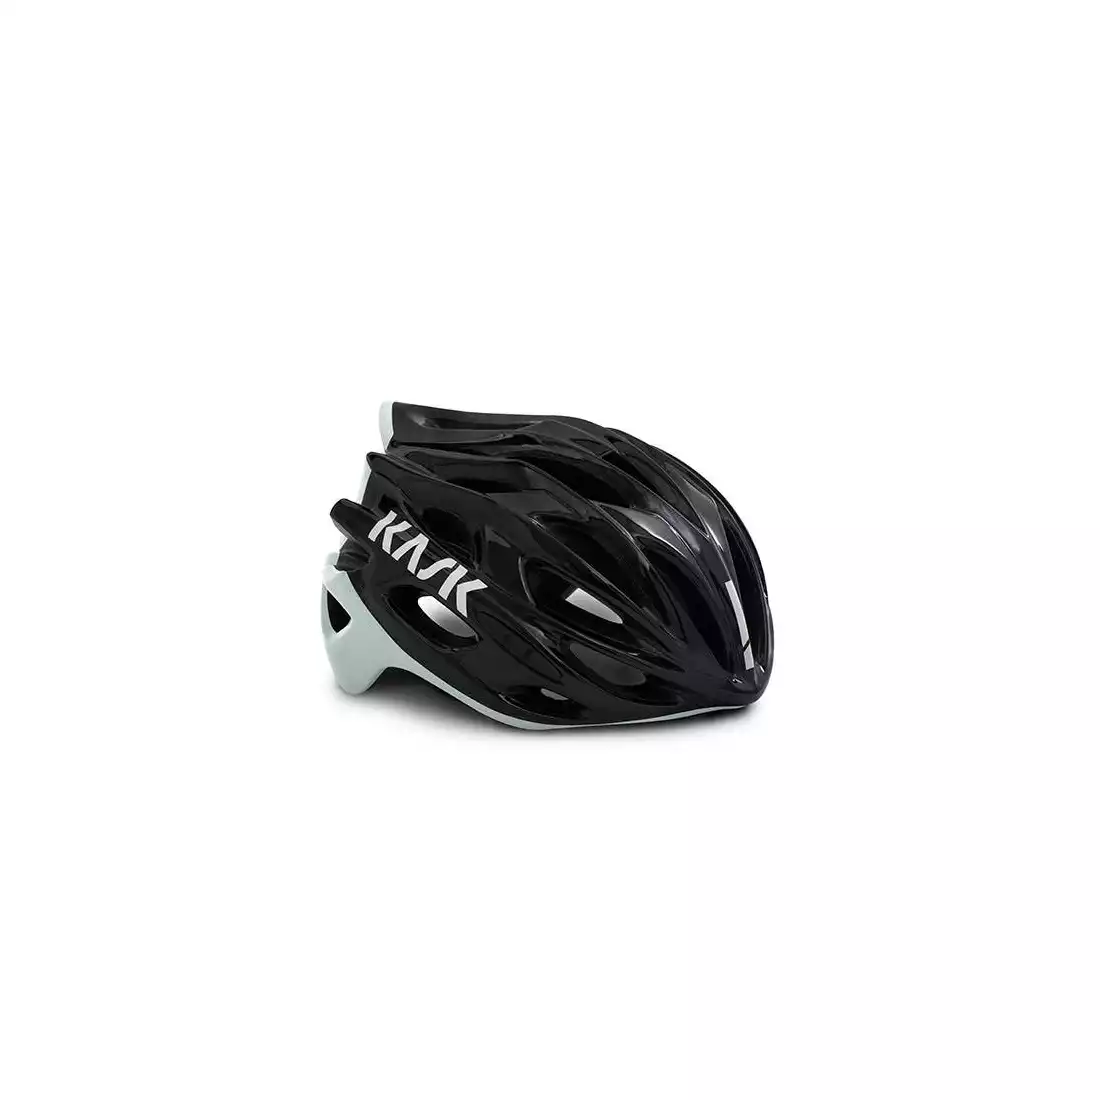 KASK MOJITO X - kask rowerowy CHE00053.240 black white